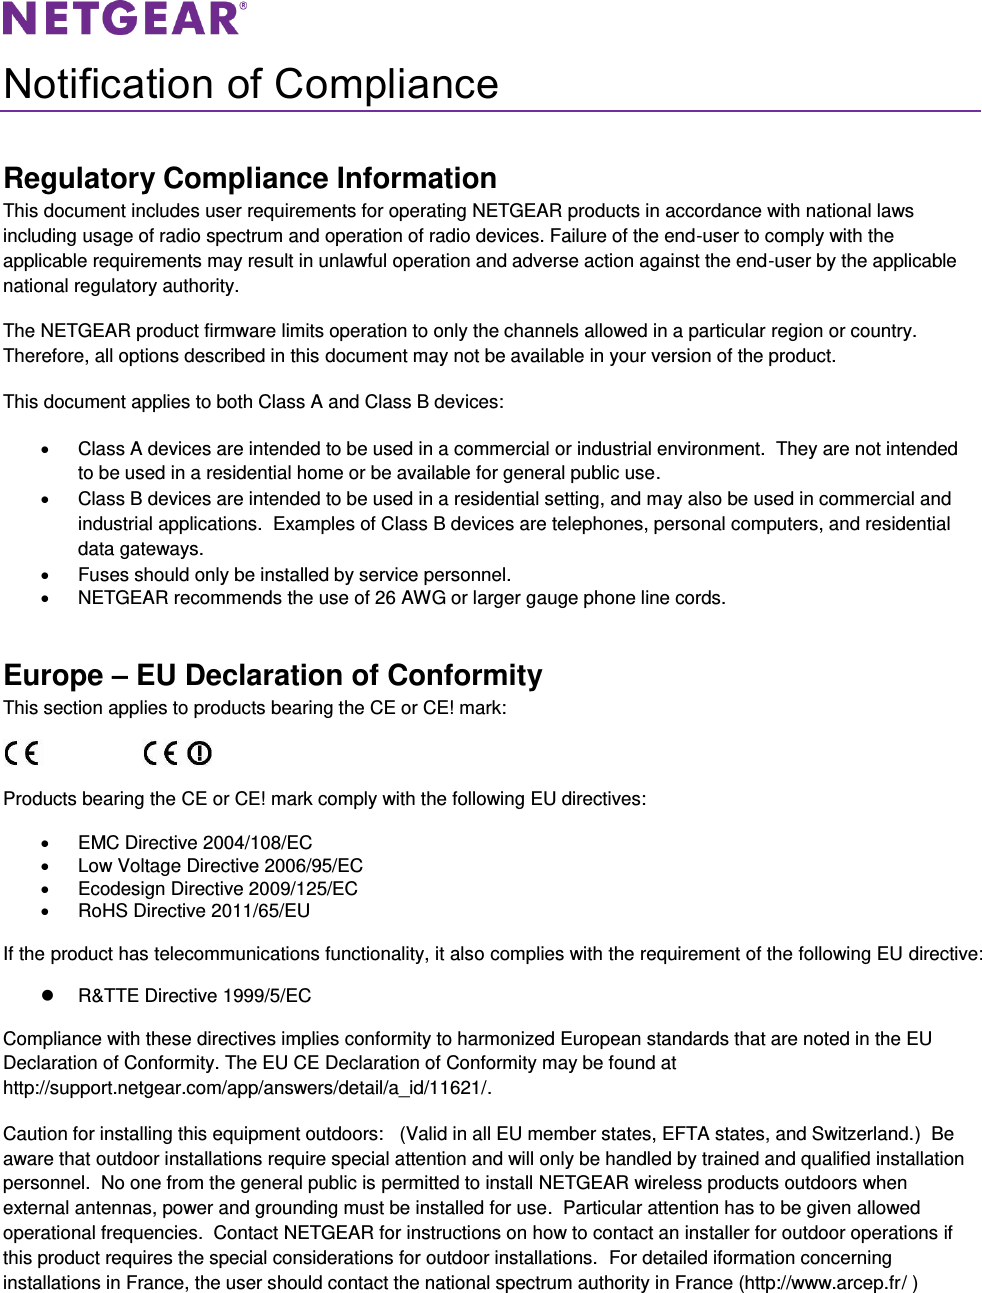   Notification of Compliance Regulatory Compliance Information This document includes user requirements for operating NETGEAR products in accordance with national laws including usage of radio spectrum and operation of radio devices. Failure of the end-user to comply with the applicable requirements may result in unlawful operation and adverse action against the end-user by the applicable national regulatory authority. The NETGEAR product firmware limits operation to only the channels allowed in a particular region or country. Therefore, all options described in this document may not be available in your version of the product. This document applies to both Class A and Class B devices:   Class A devices are intended to be used in a commercial or industrial environment.  They are not intended to be used in a residential home or be available for general public use.   Class B devices are intended to be used in a residential setting, and may also be used in commercial and industrial applications.  Examples of Class B devices are telephones, personal computers, and residential data gateways.   Fuses should only be installed by service personnel.   NETGEAR recommends the use of 26 AWG or larger gauge phone line cords. Europe – EU Declaration of Conformity This section applies to products bearing the CE or CE! mark:                      Products bearing the CE or CE! mark comply with the following EU directives:   EMC Directive 2004/108/EC   Low Voltage Directive 2006/95/EC   Ecodesign Directive 2009/125/EC   RoHS Directive 2011/65/EU If the product has telecommunications functionality, it also complies with the requirement of the following EU directive:   R&amp;TTE Directive 1999/5/EC Compliance with these directives implies conformity to harmonized European standards that are noted in the EU Declaration of Conformity. The EU CE Declaration of Conformity may be found at http://support.netgear.com/app/answers/detail/a_id/11621/. Caution for installing this equipment outdoors:   (Valid in all EU member states, EFTA states, and Switzerland.)  Be aware that outdoor installations require special attention and will only be handled by trained and qualified installation personnel.  No one from the general public is permitted to install NETGEAR wireless products outdoors when external antennas, power and grounding must be installed for use.  Particular attention has to be given allowed operational frequencies.  Contact NETGEAR for instructions on how to contact an installer for outdoor operations if this product requires the special considerations for outdoor installations.  For detailed iformation concerning installations in France, the user should contact the national spectrum authority in France (http://www.arcep.fr/ )  